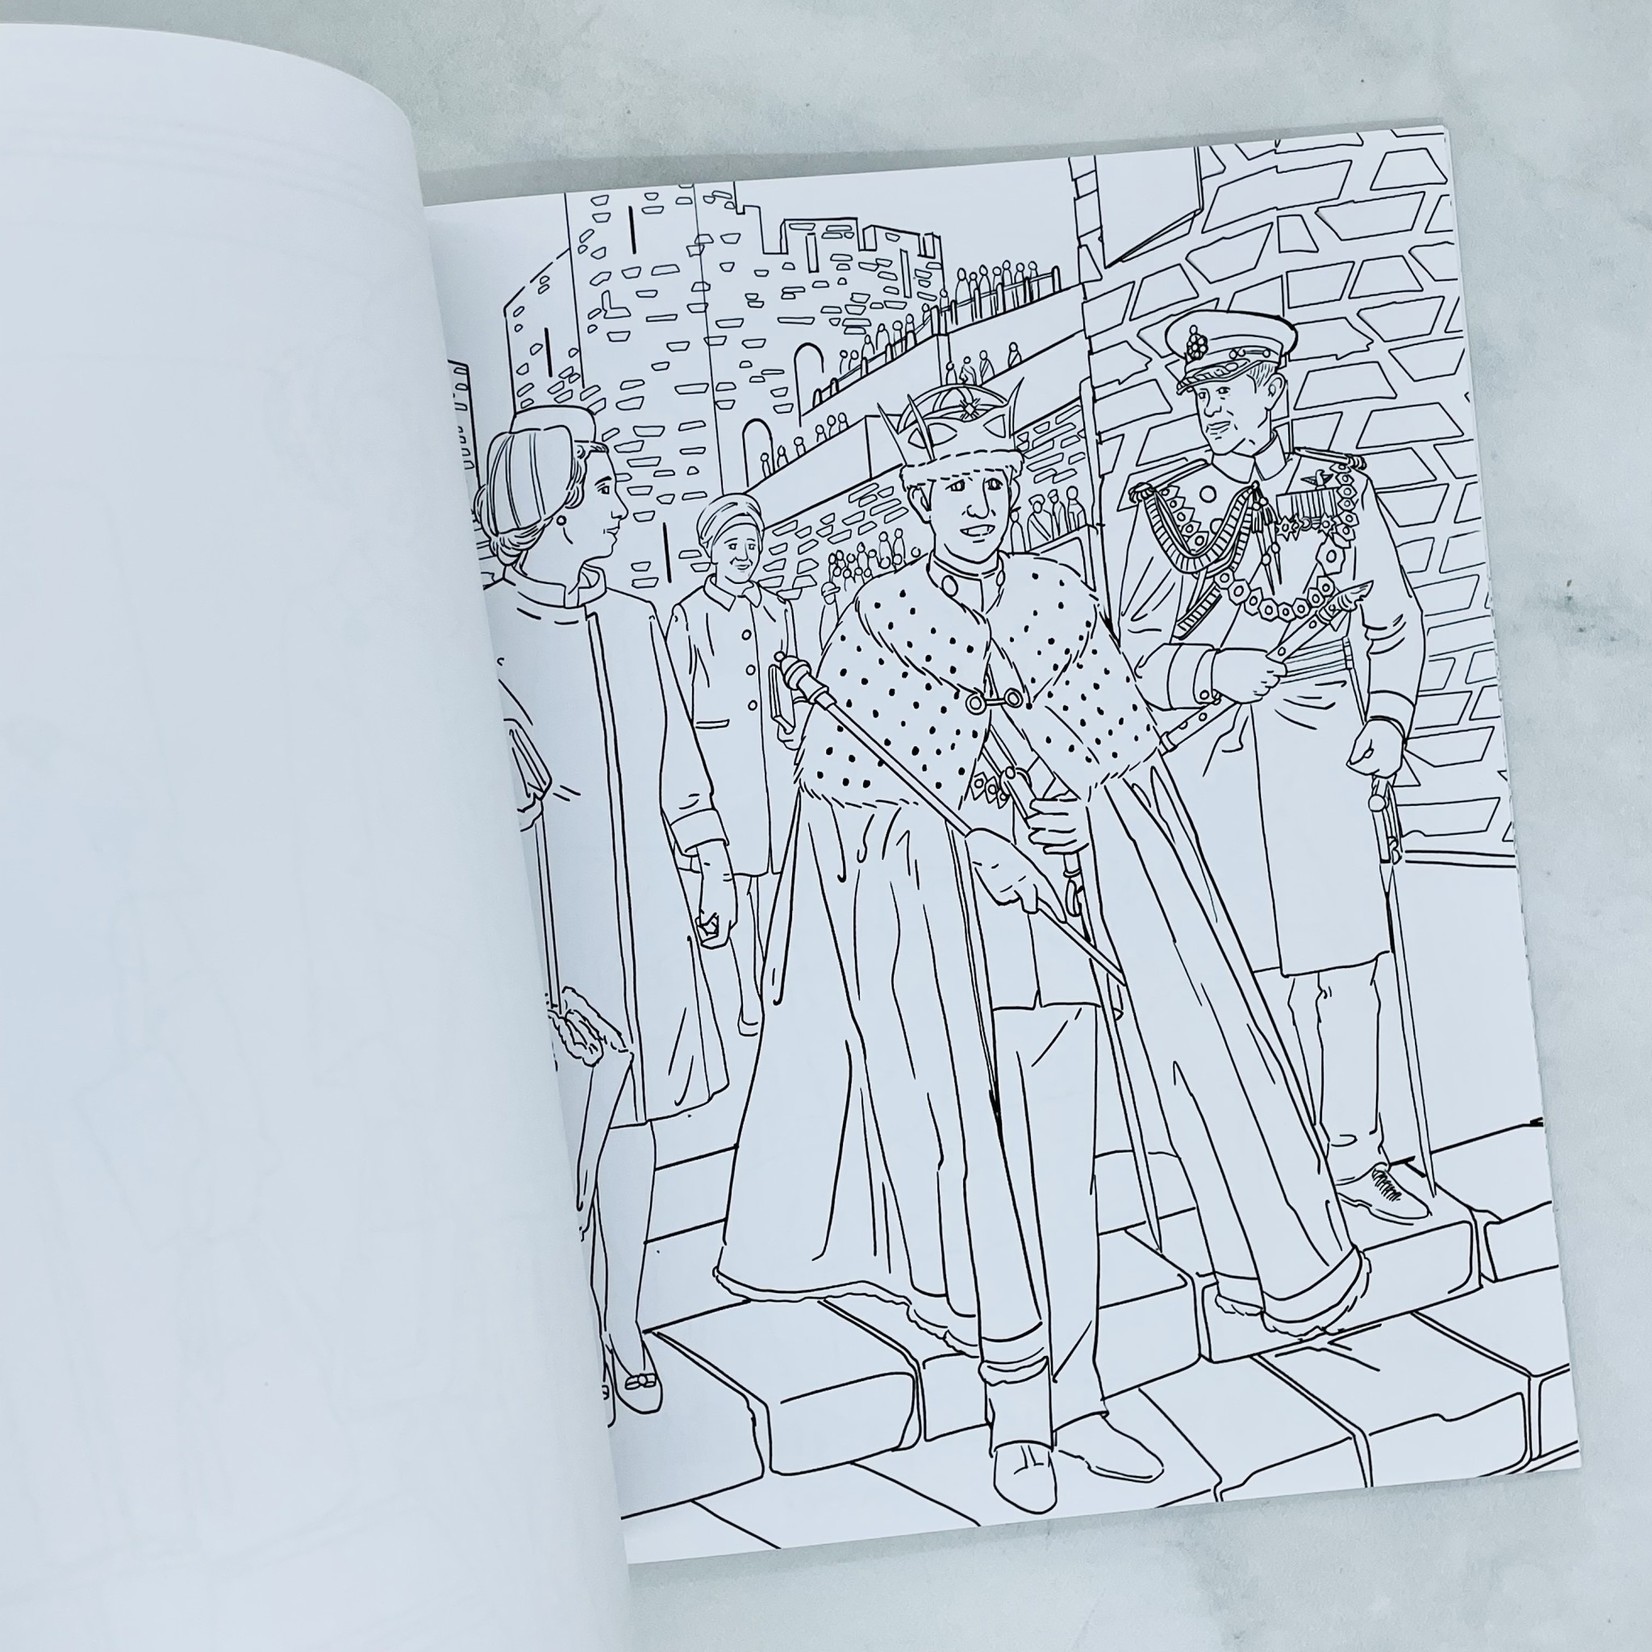 The Unofficial The Crown Coloring Book DNO